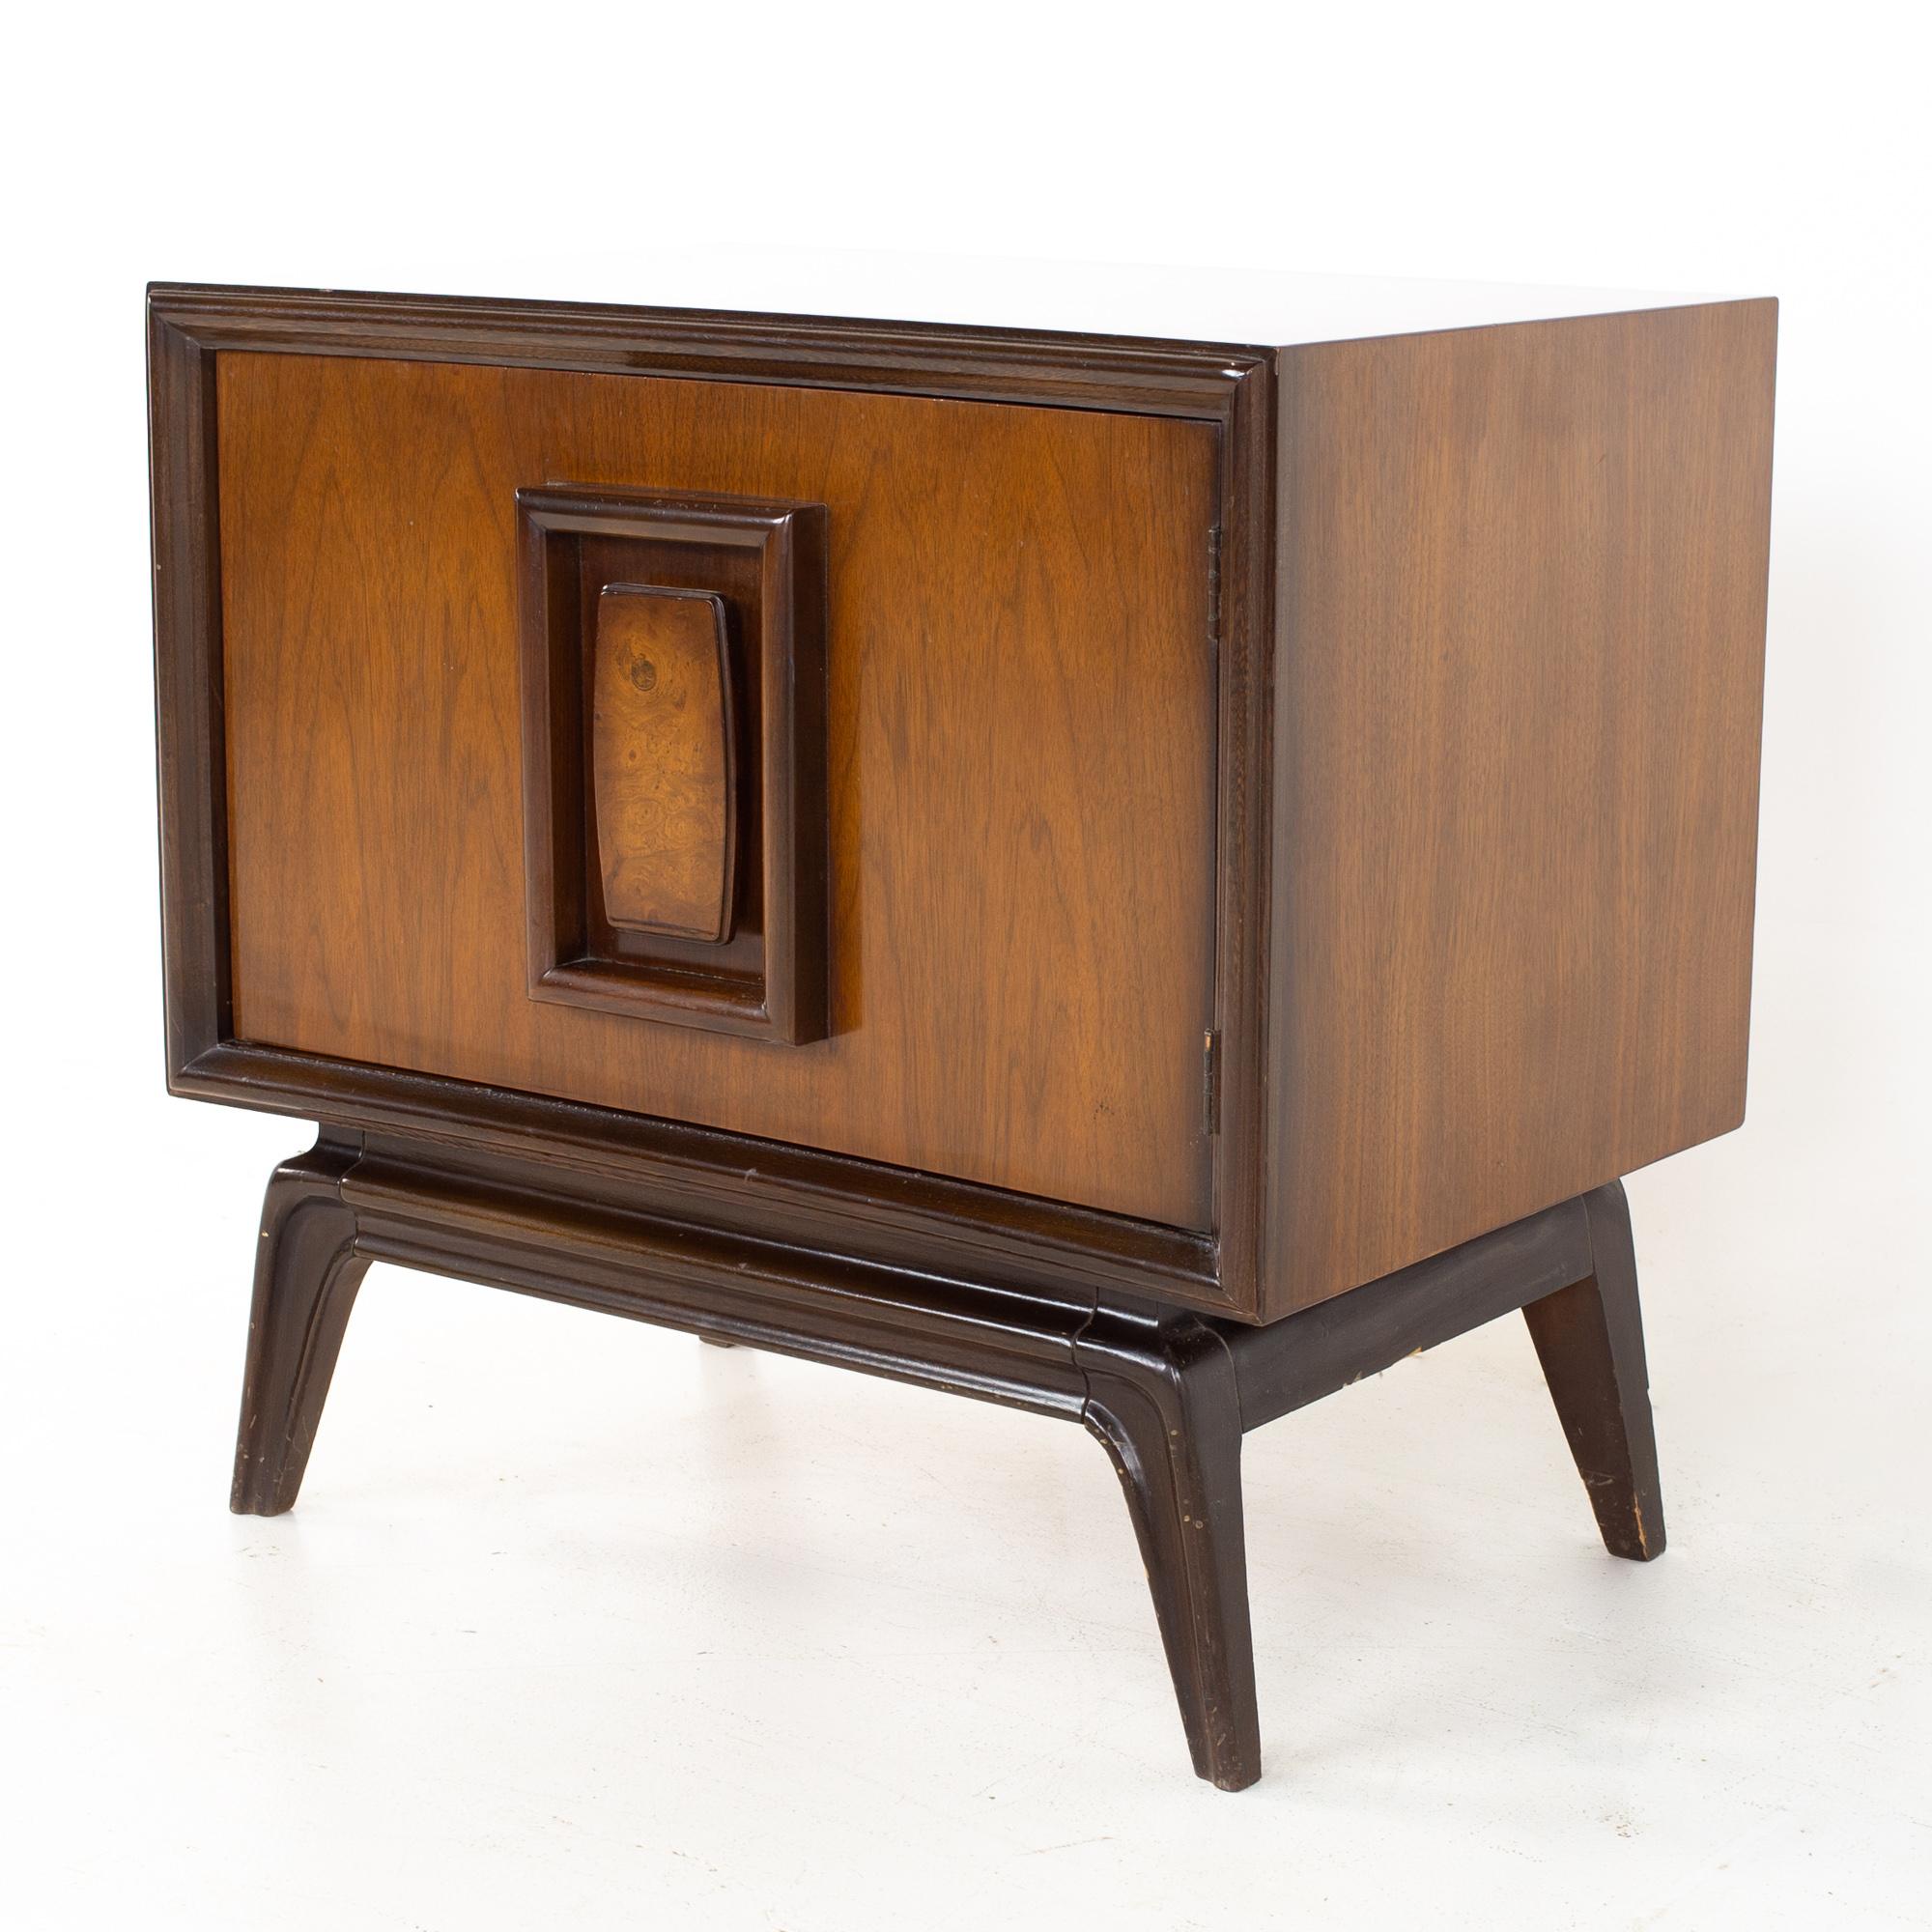 American Hoke Wood Products Mid Century Walnut and Burlwood Nightstands, a Pair